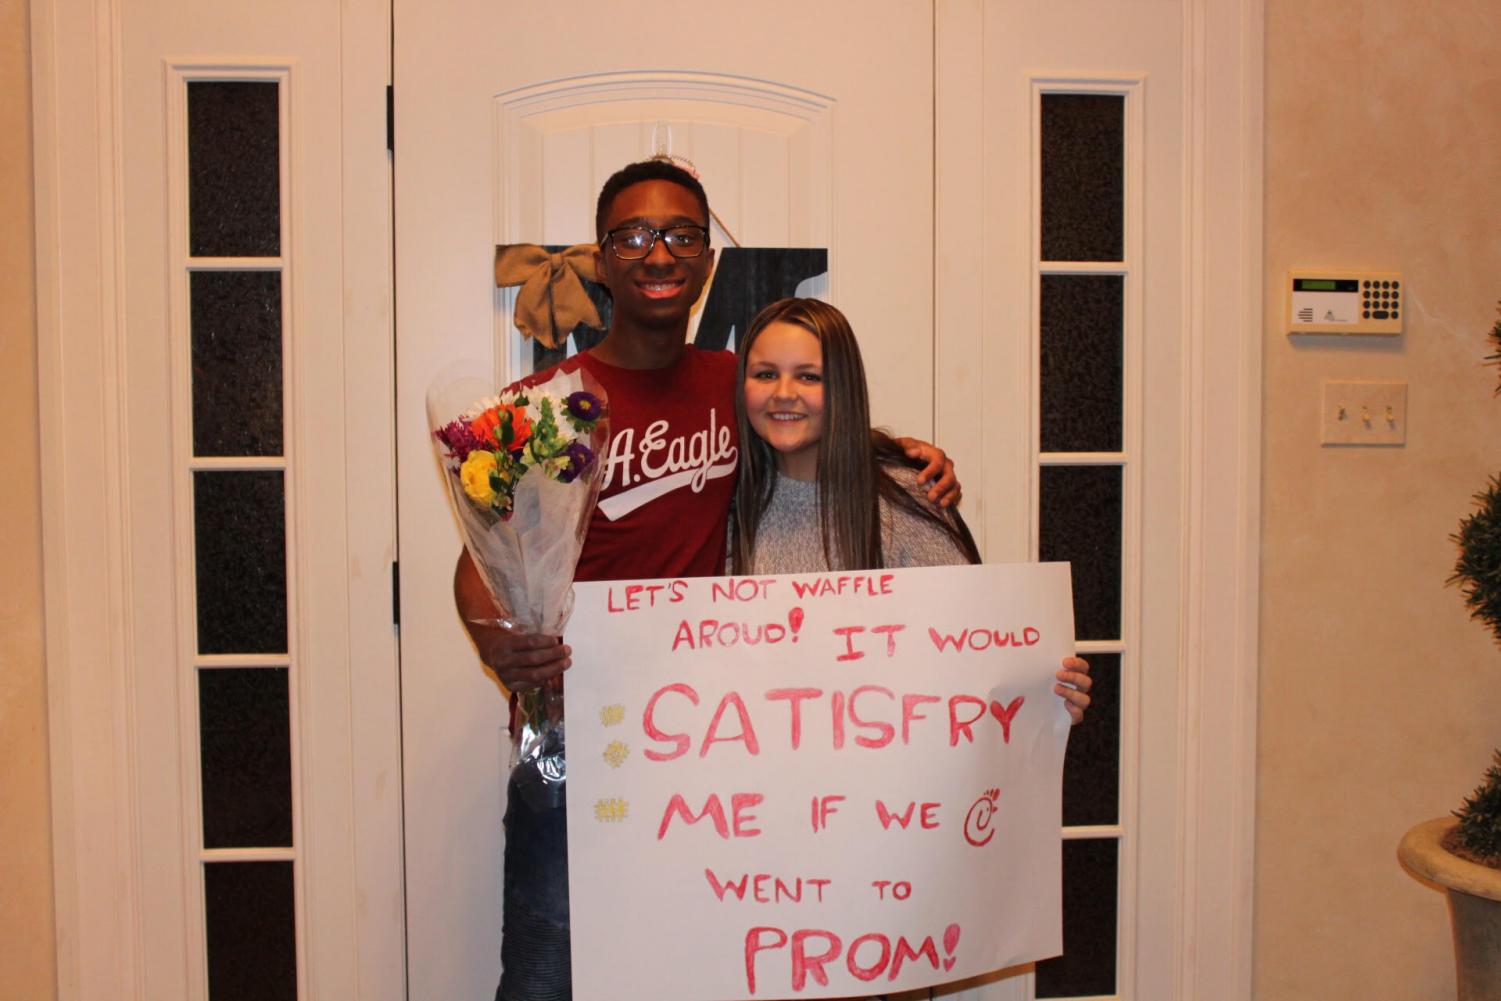 Promposal ideas: most creative ways to ask your date – The Knight